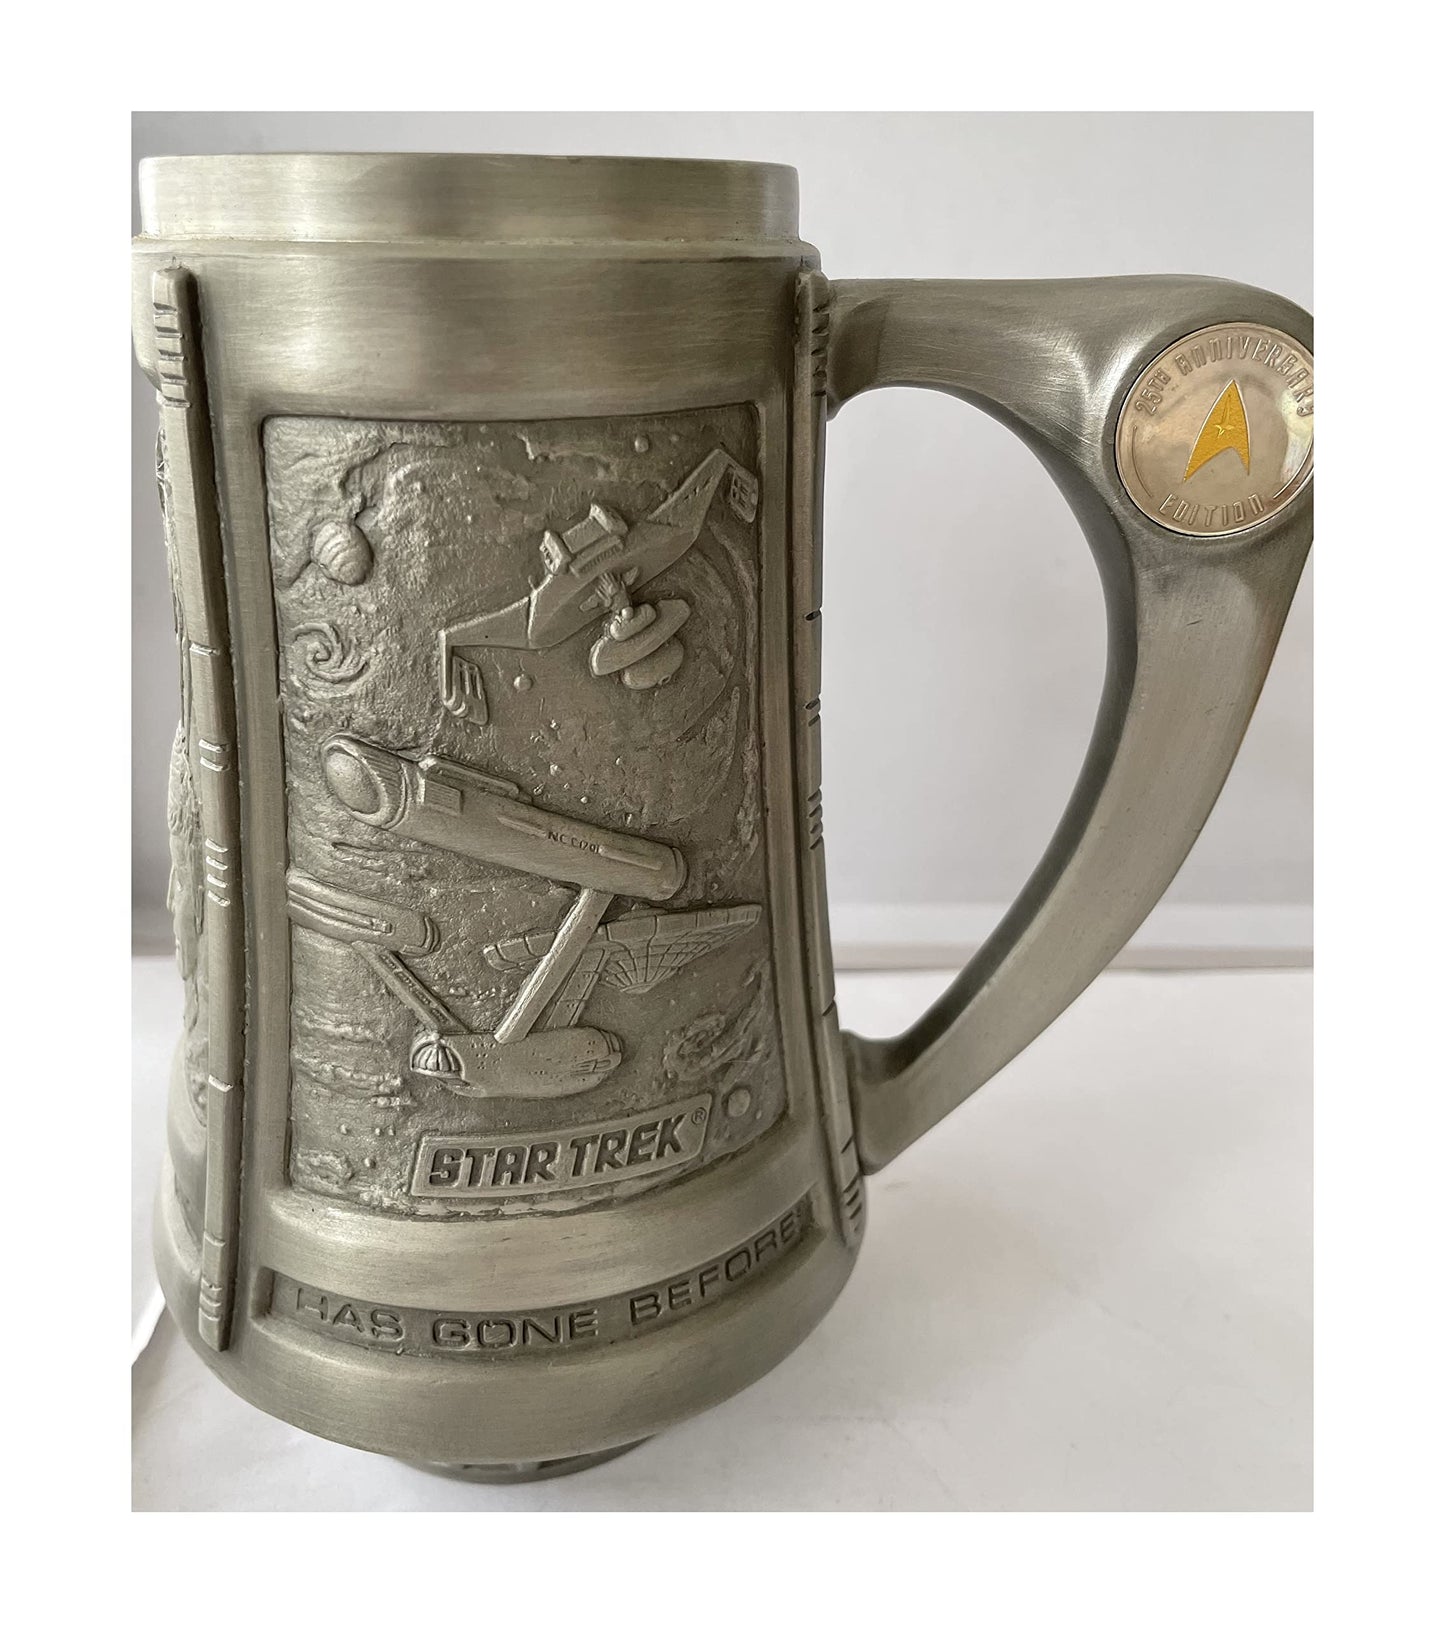 Vintage 1991 Franklin Mint - The Official Star Trek The Original Series 25th Anniversary Pewter Tankard - Shop Stock Room Find